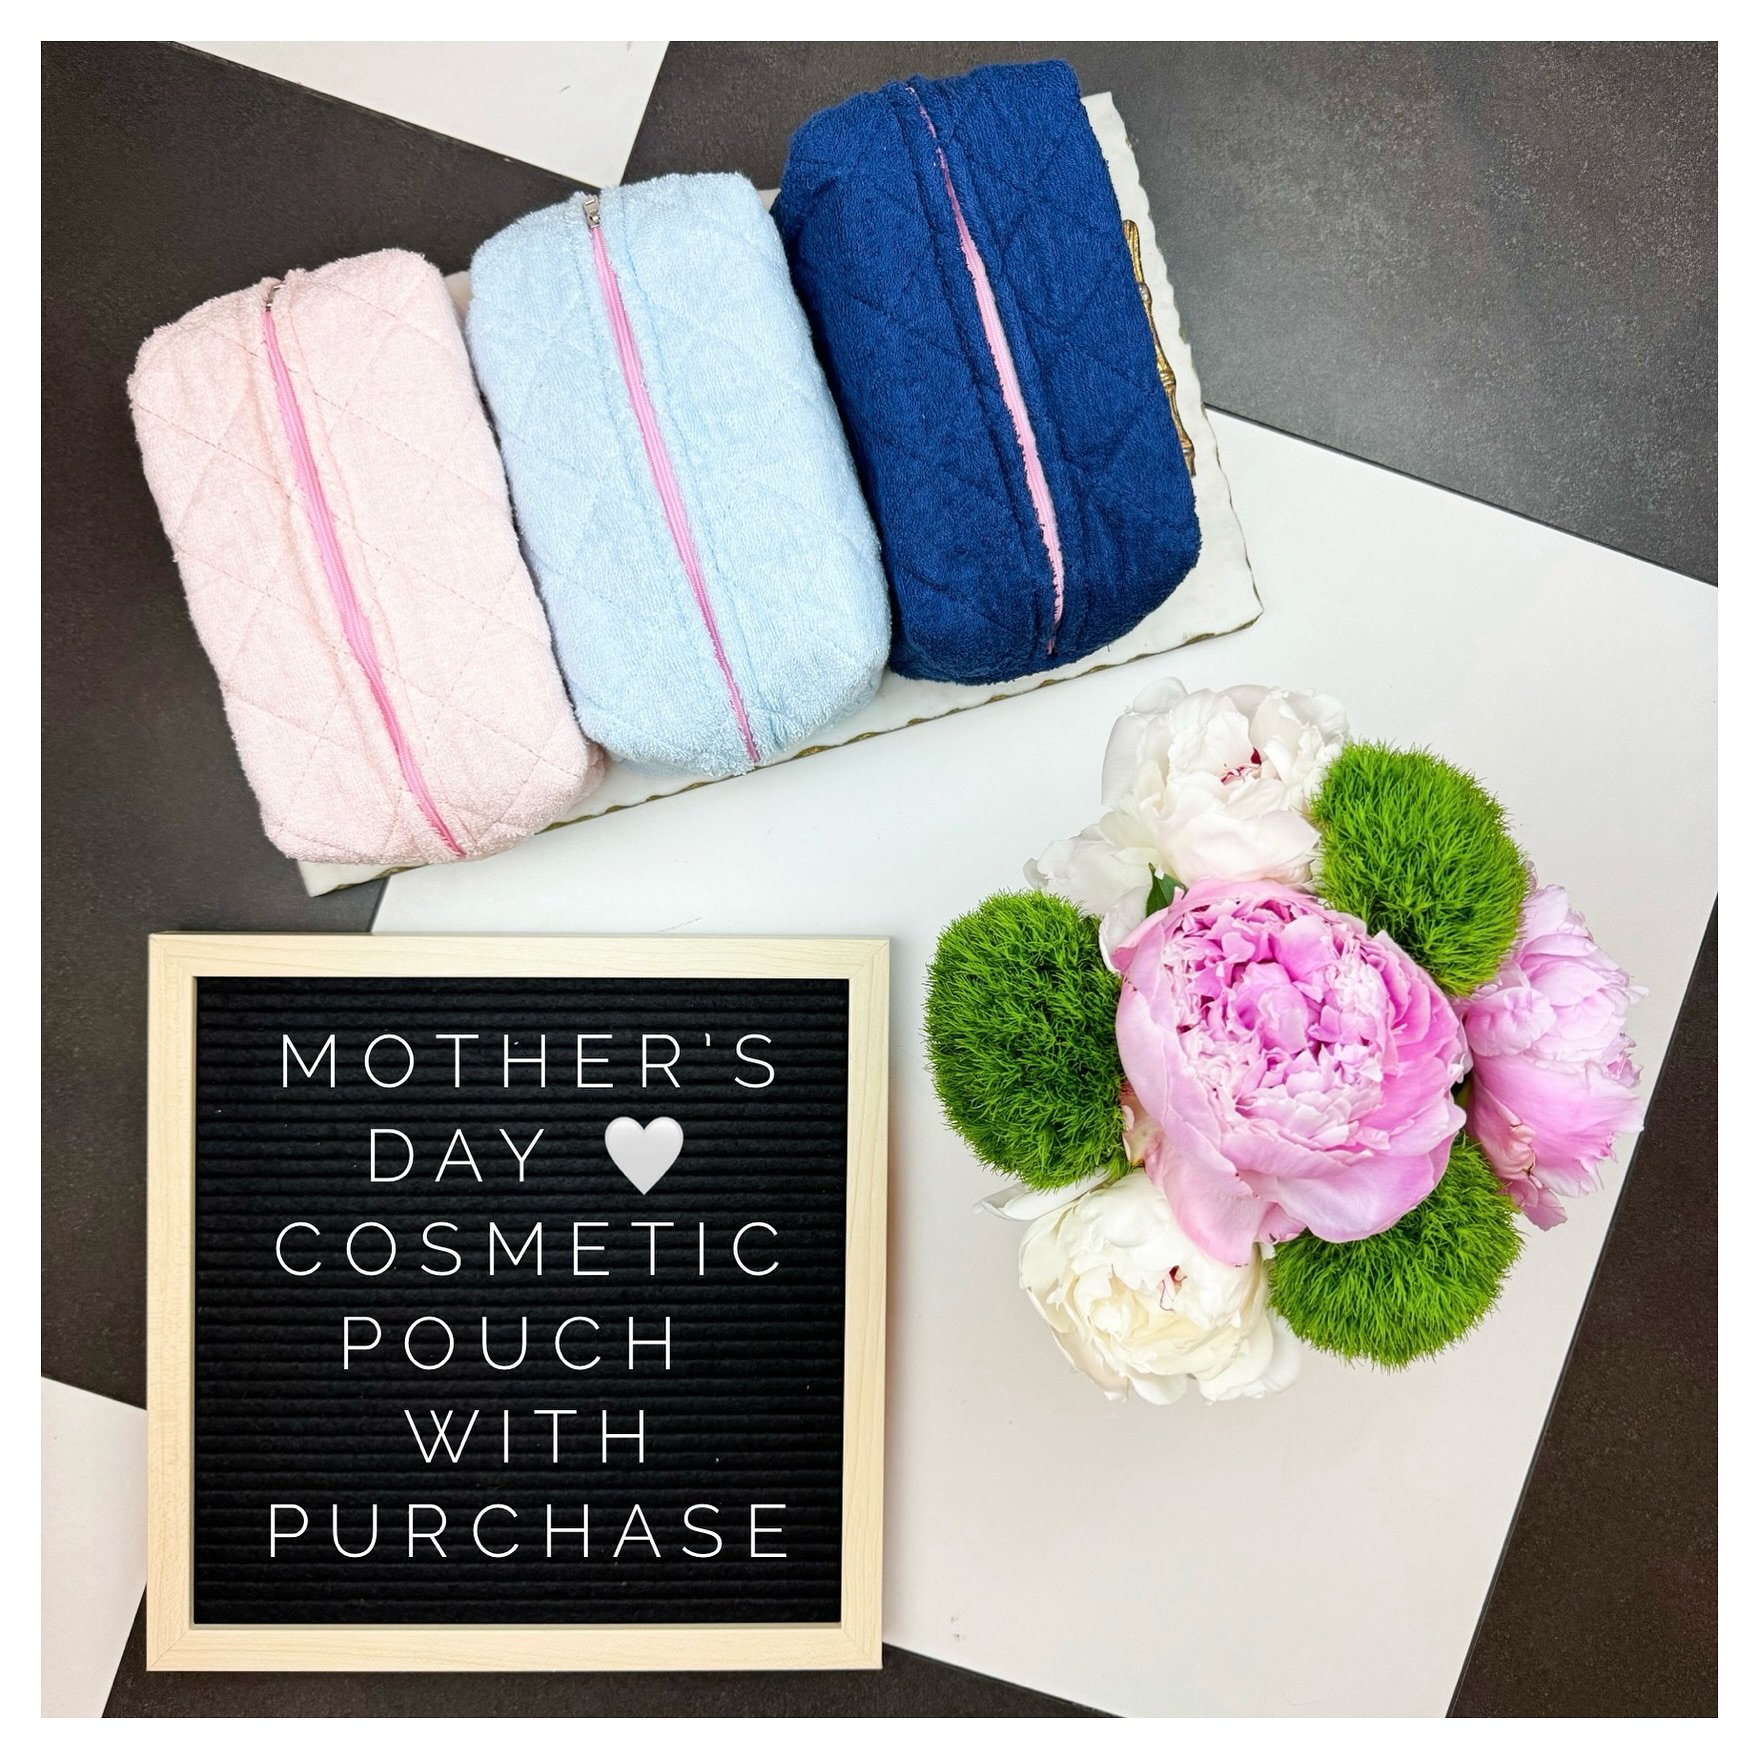 Come grab LAST MINUTE GIFTS for the MAMAs this weekend 🎀

OPEN 11-3 in both shops on SUNDAY and a Terry Cosmetic Pouch with purchase over $125!!